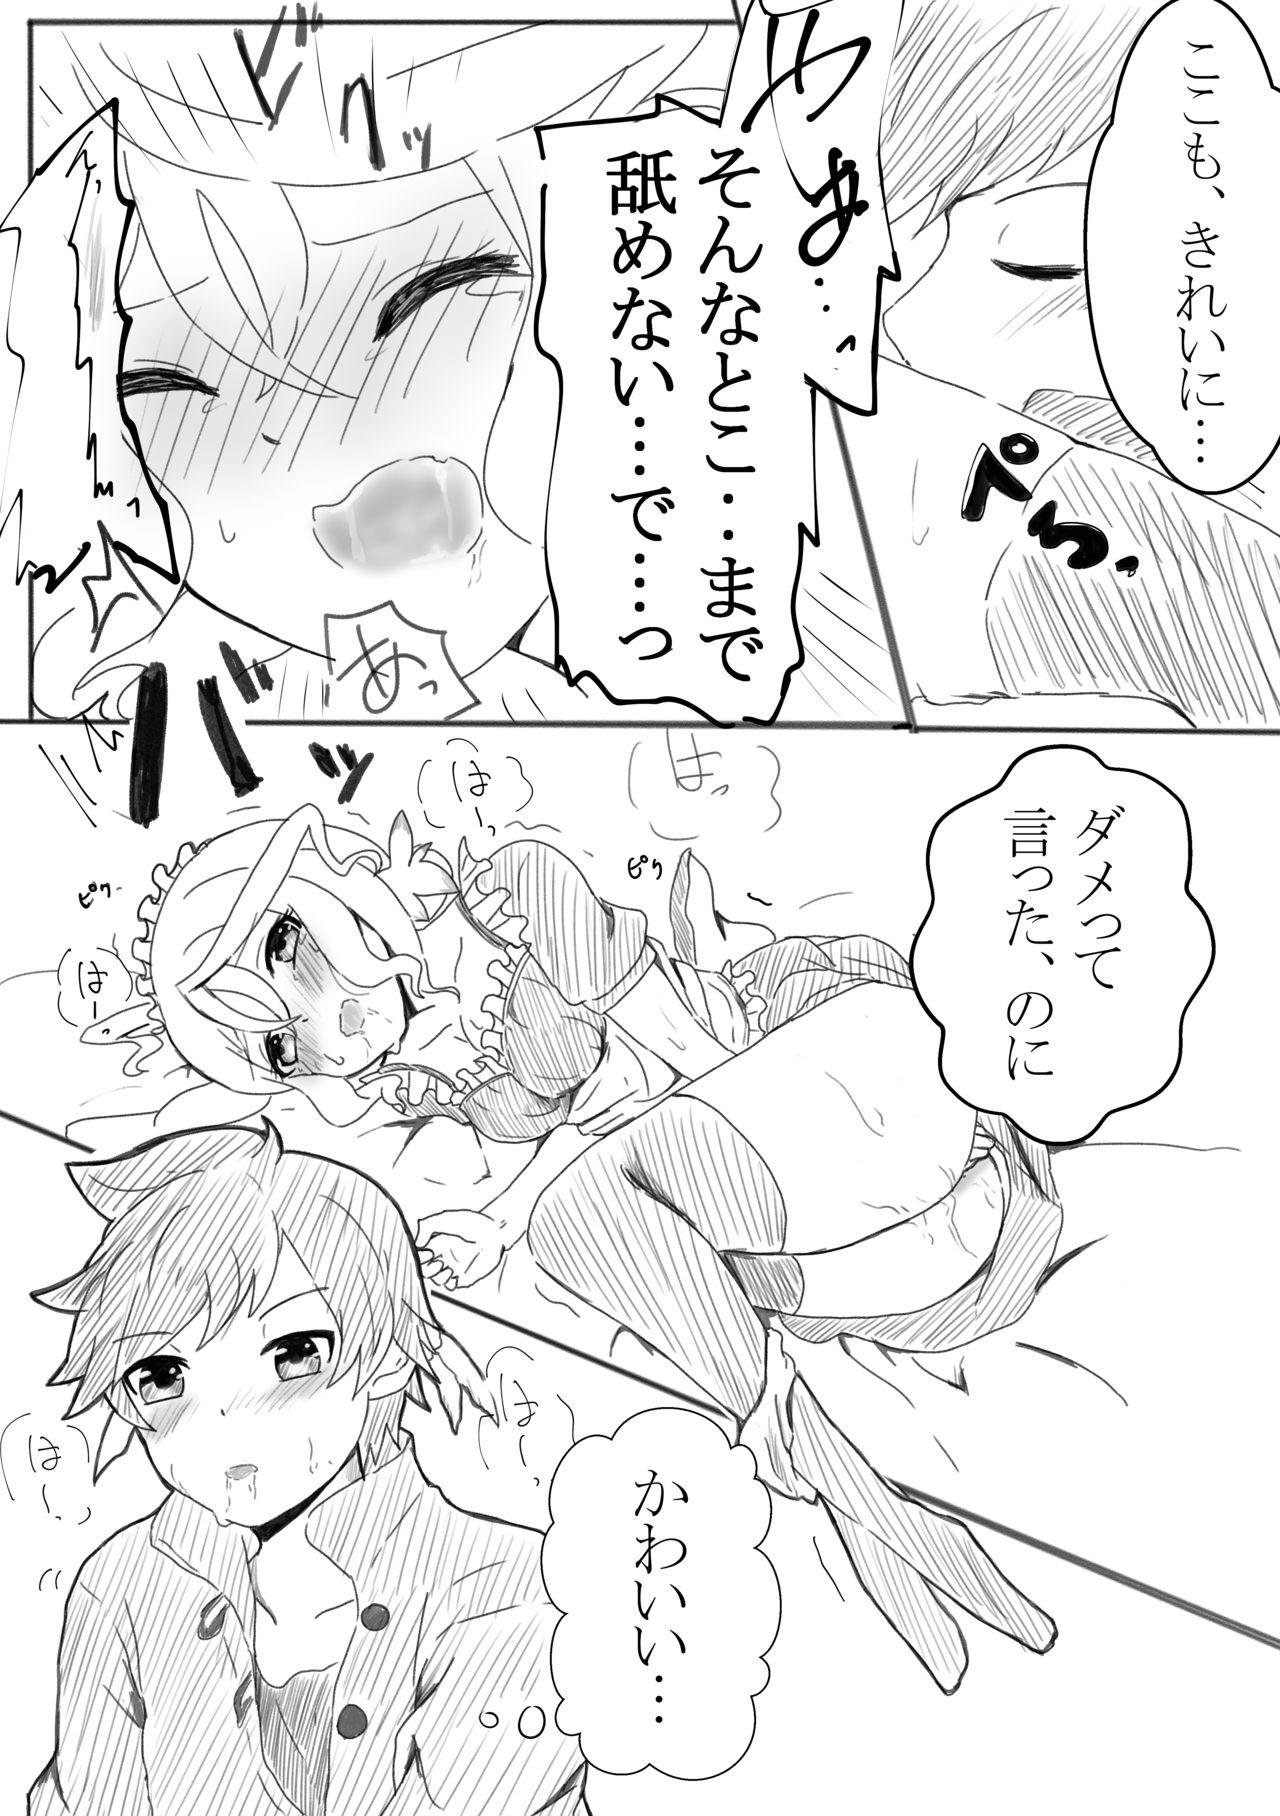 Mistress アリーシャで癒して？ - Tales of zestiria First Time - Page 9